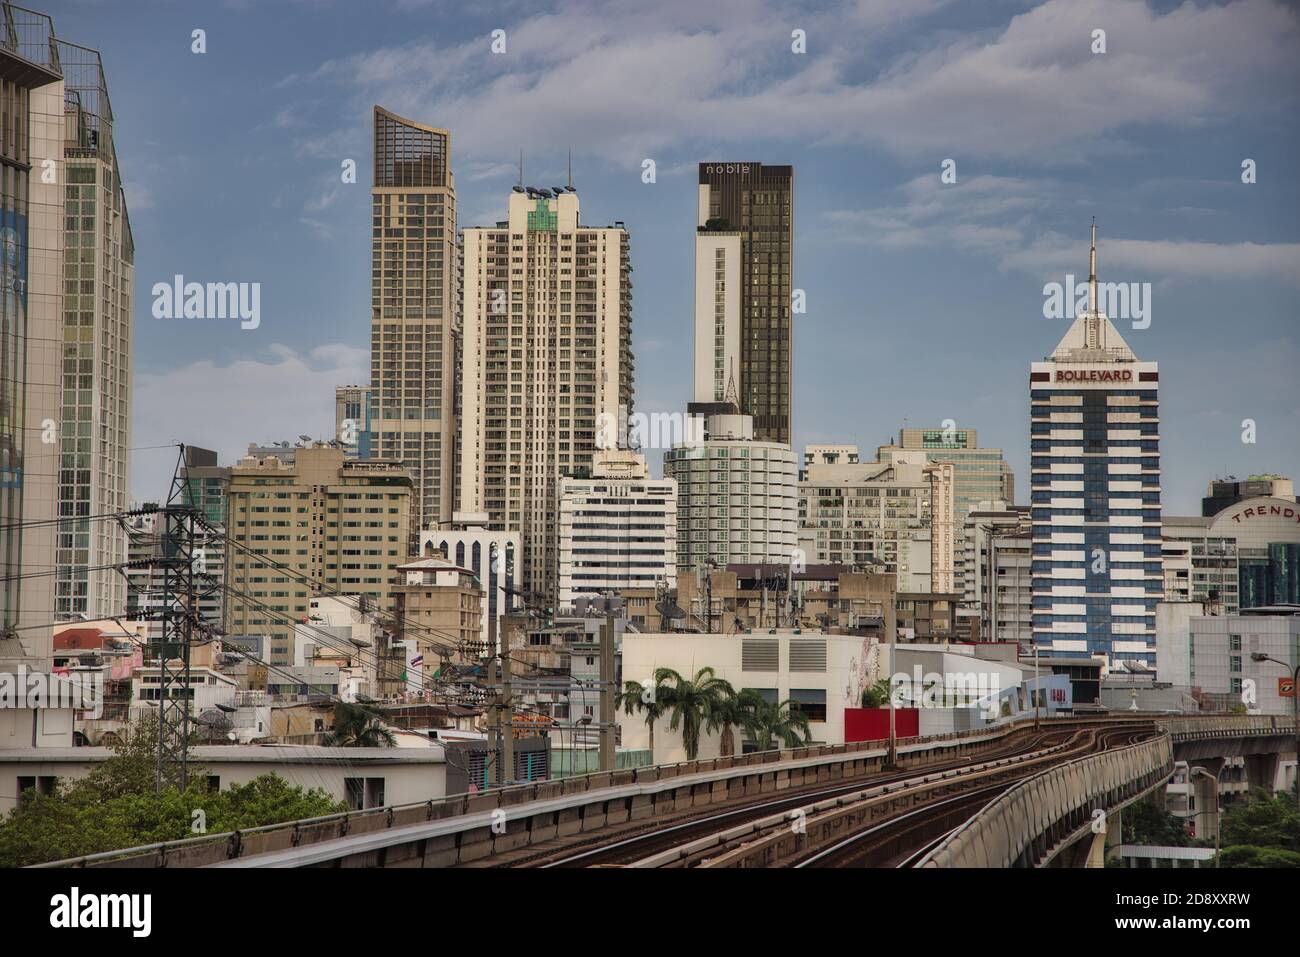 This unique photo shows the skyline of Bangkok in Thailand including the skytrain railroad track in the foreground and the skyscrapers. Stock Photo